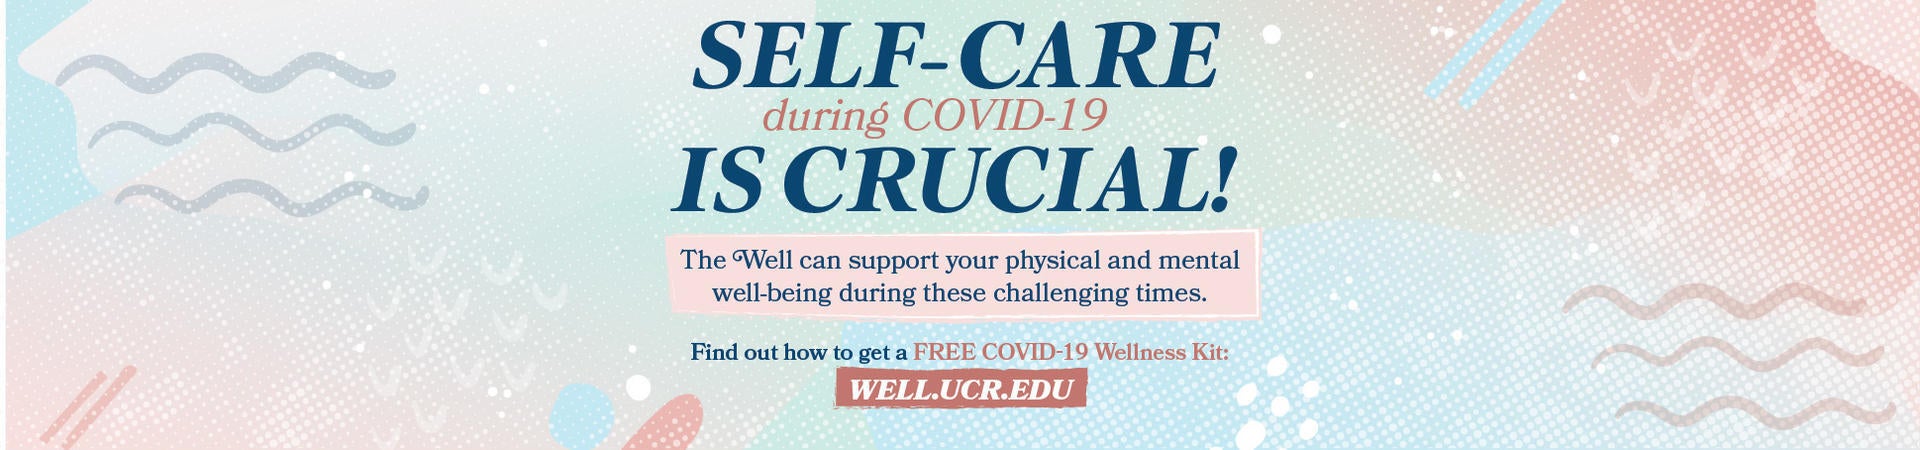 Self-care during COVID-19 is Crucial: WELL.UCR.EDU